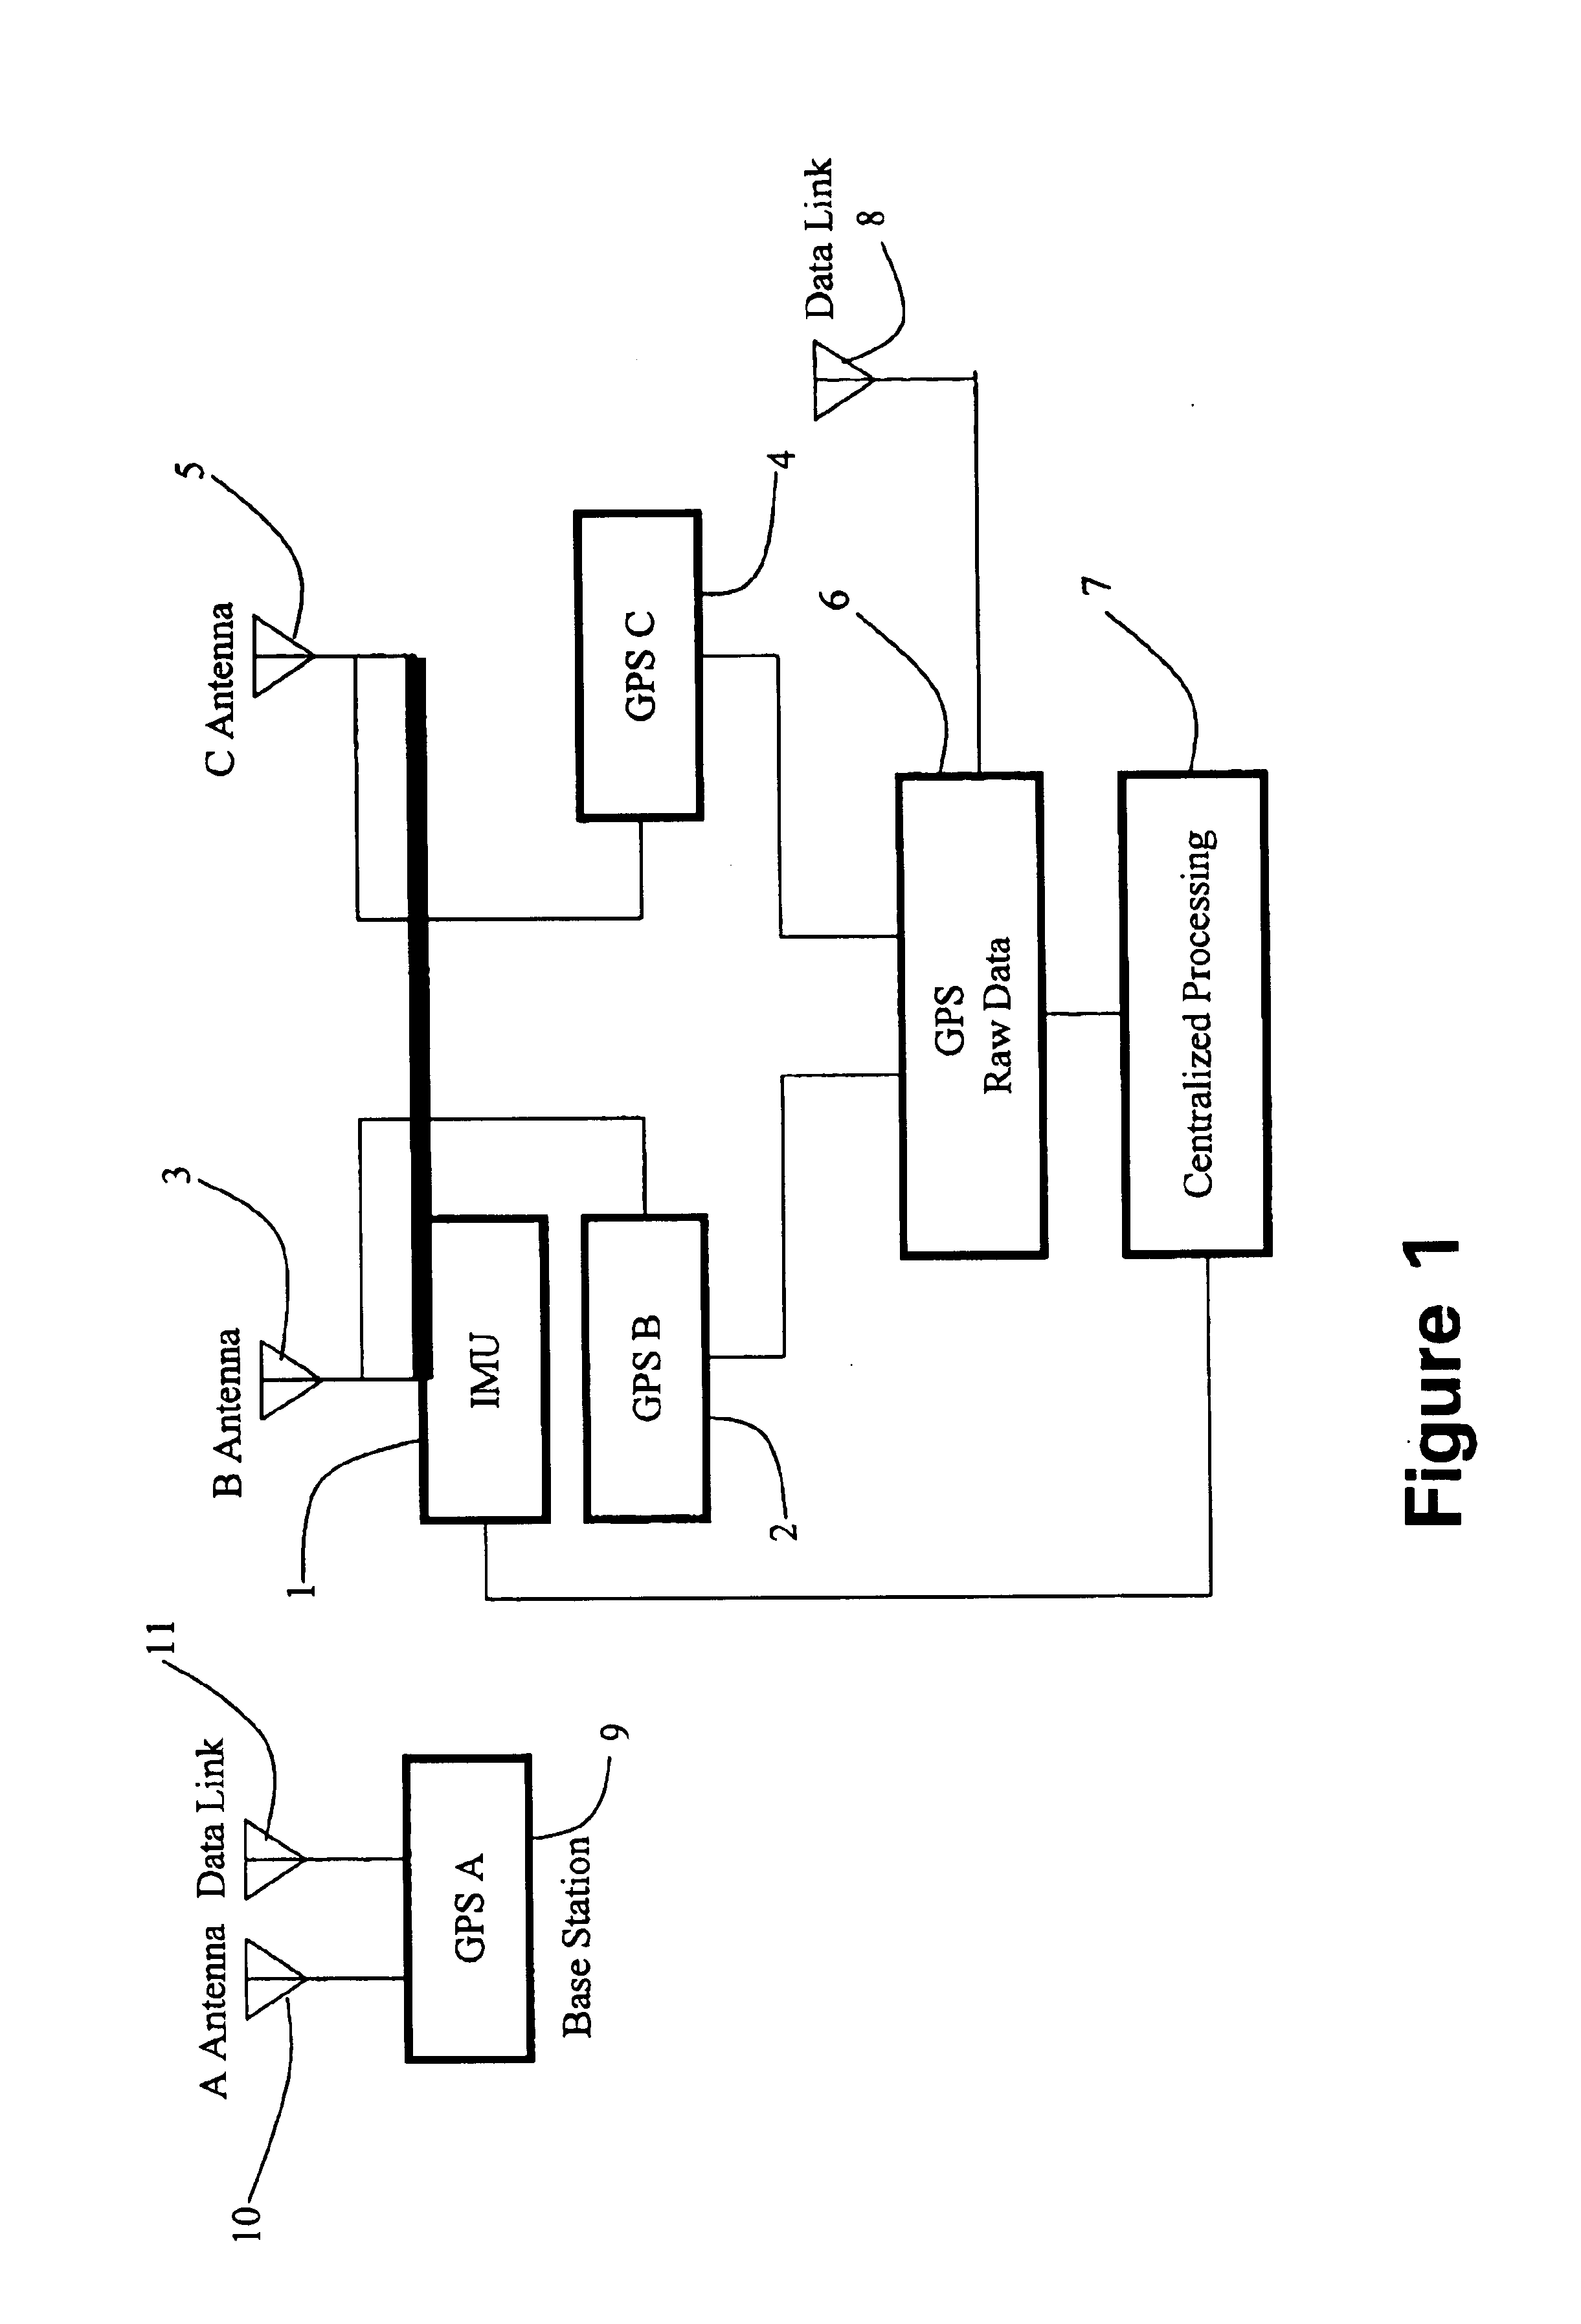 Low cost multisensor high precision positioning and data integrated method and system thereof